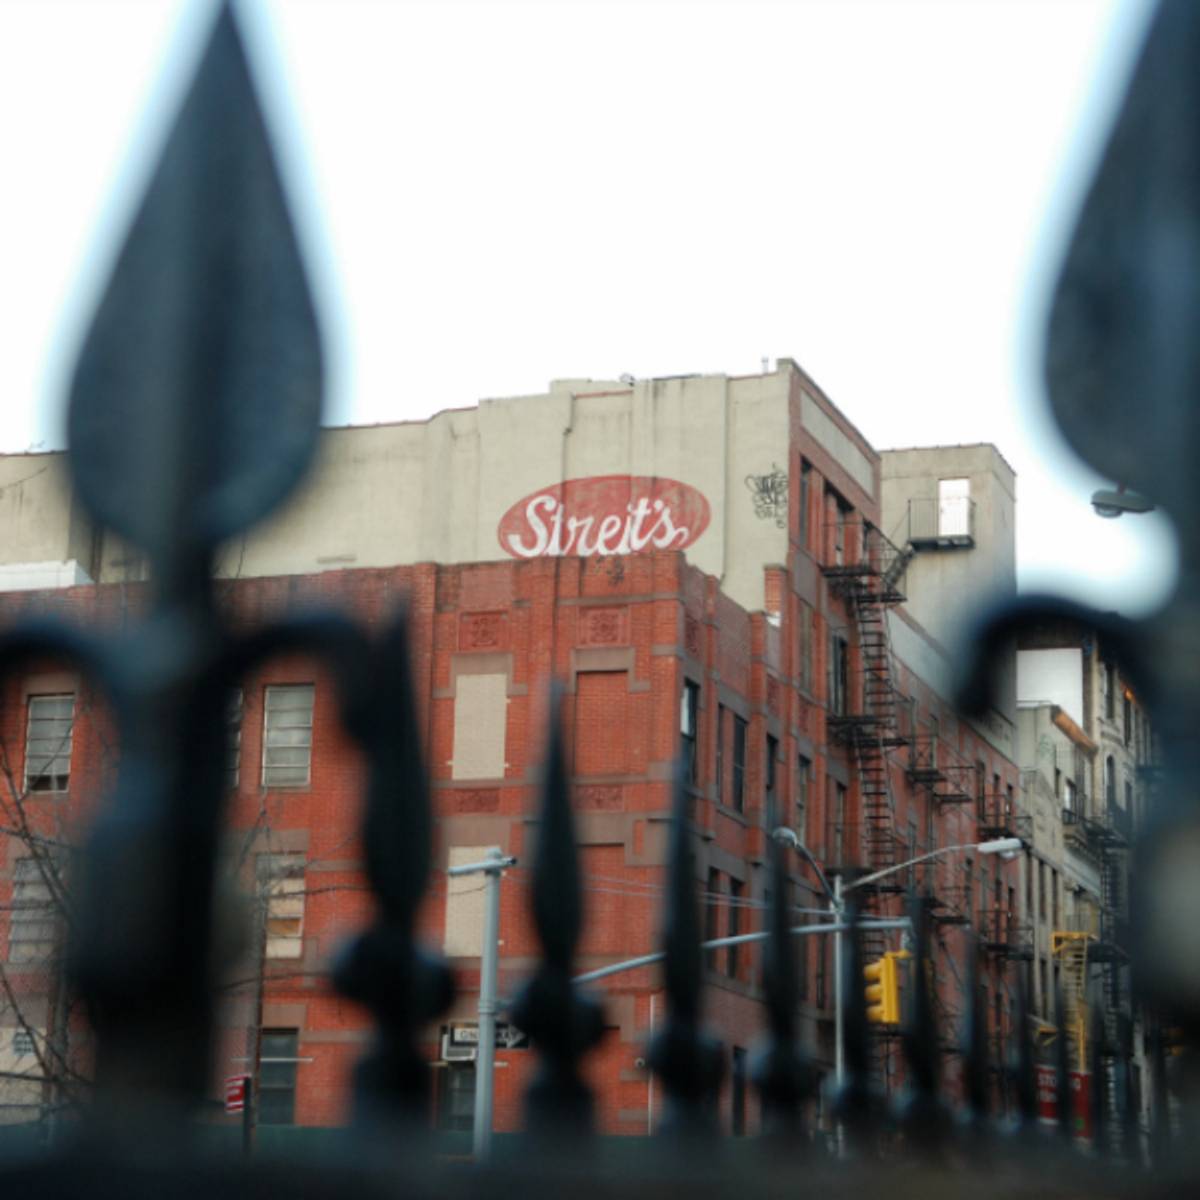 Streit’s mazto factory on Manhattan’s Lower East Side. (Image courtesy of Michael Levine)